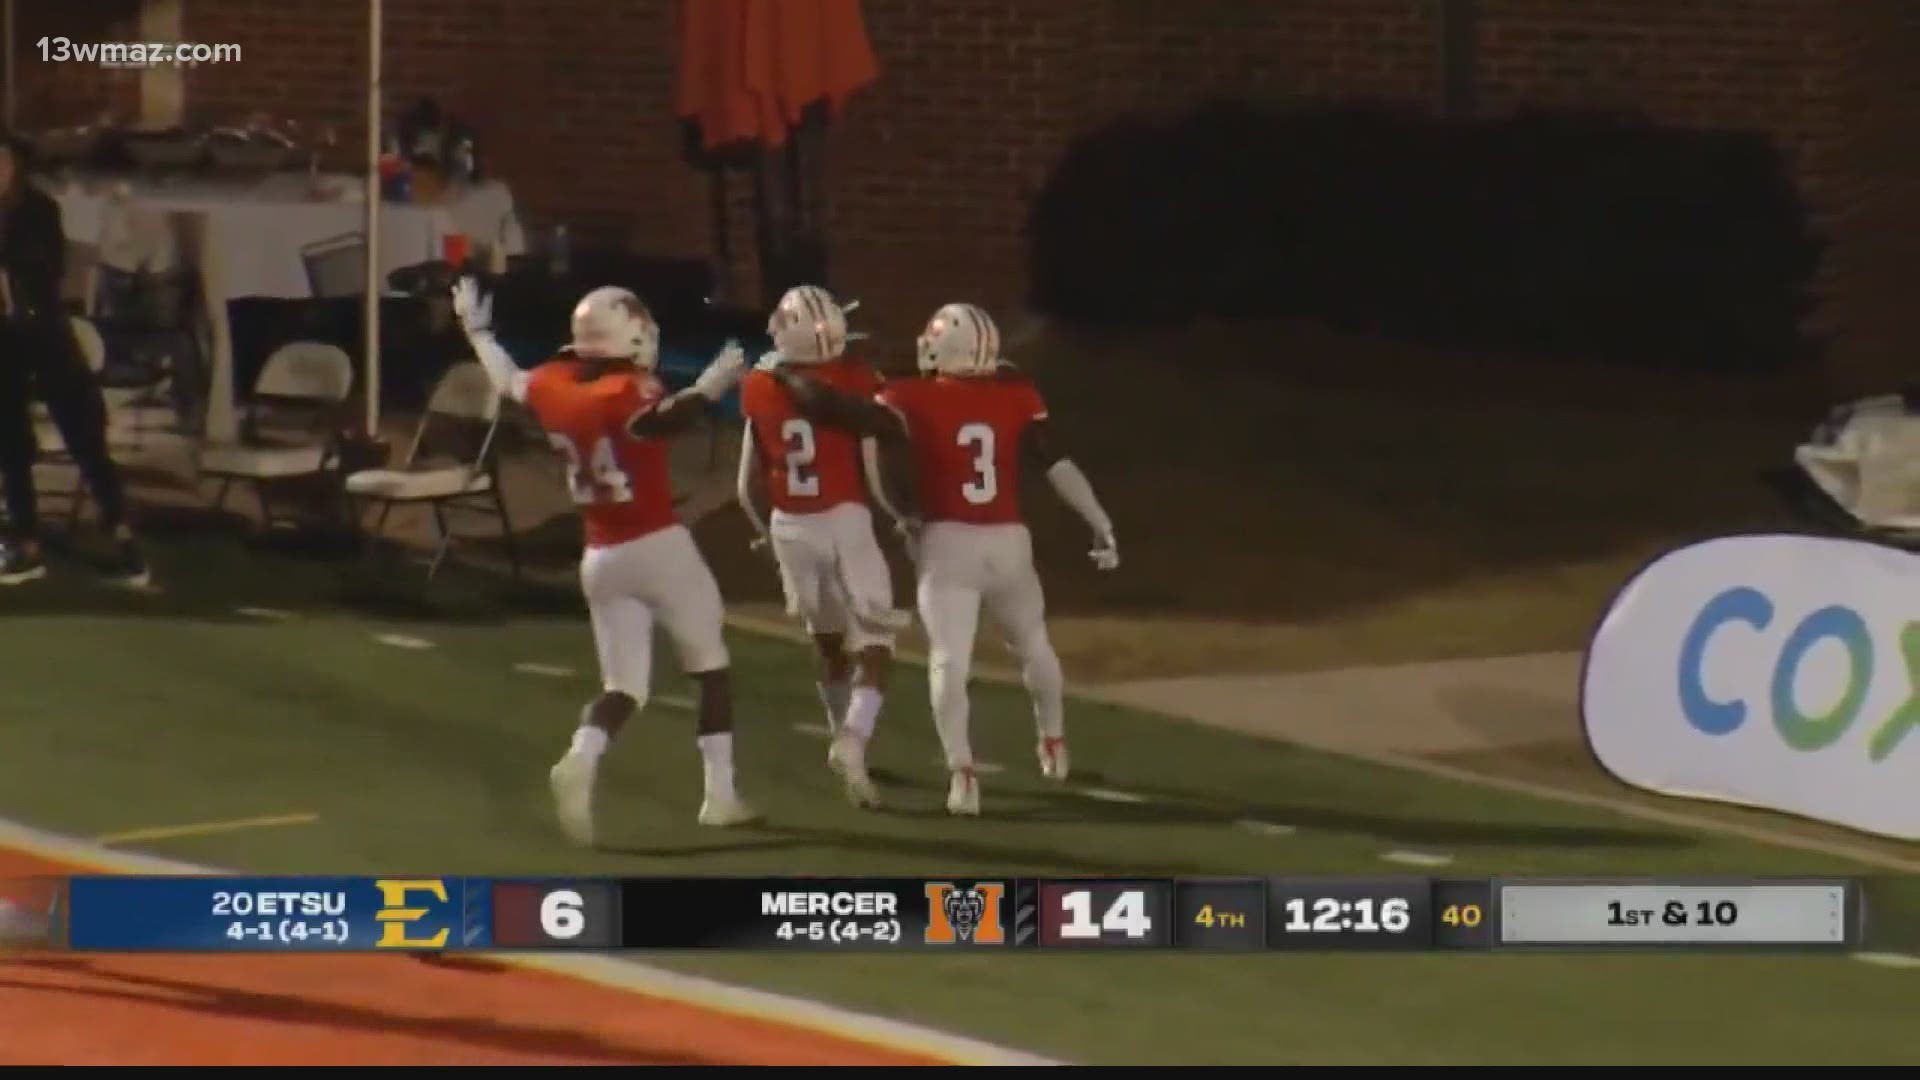 Mercer beat ETSU, 21-13. The win moves Mercer to 5-2 in Southern Conference play